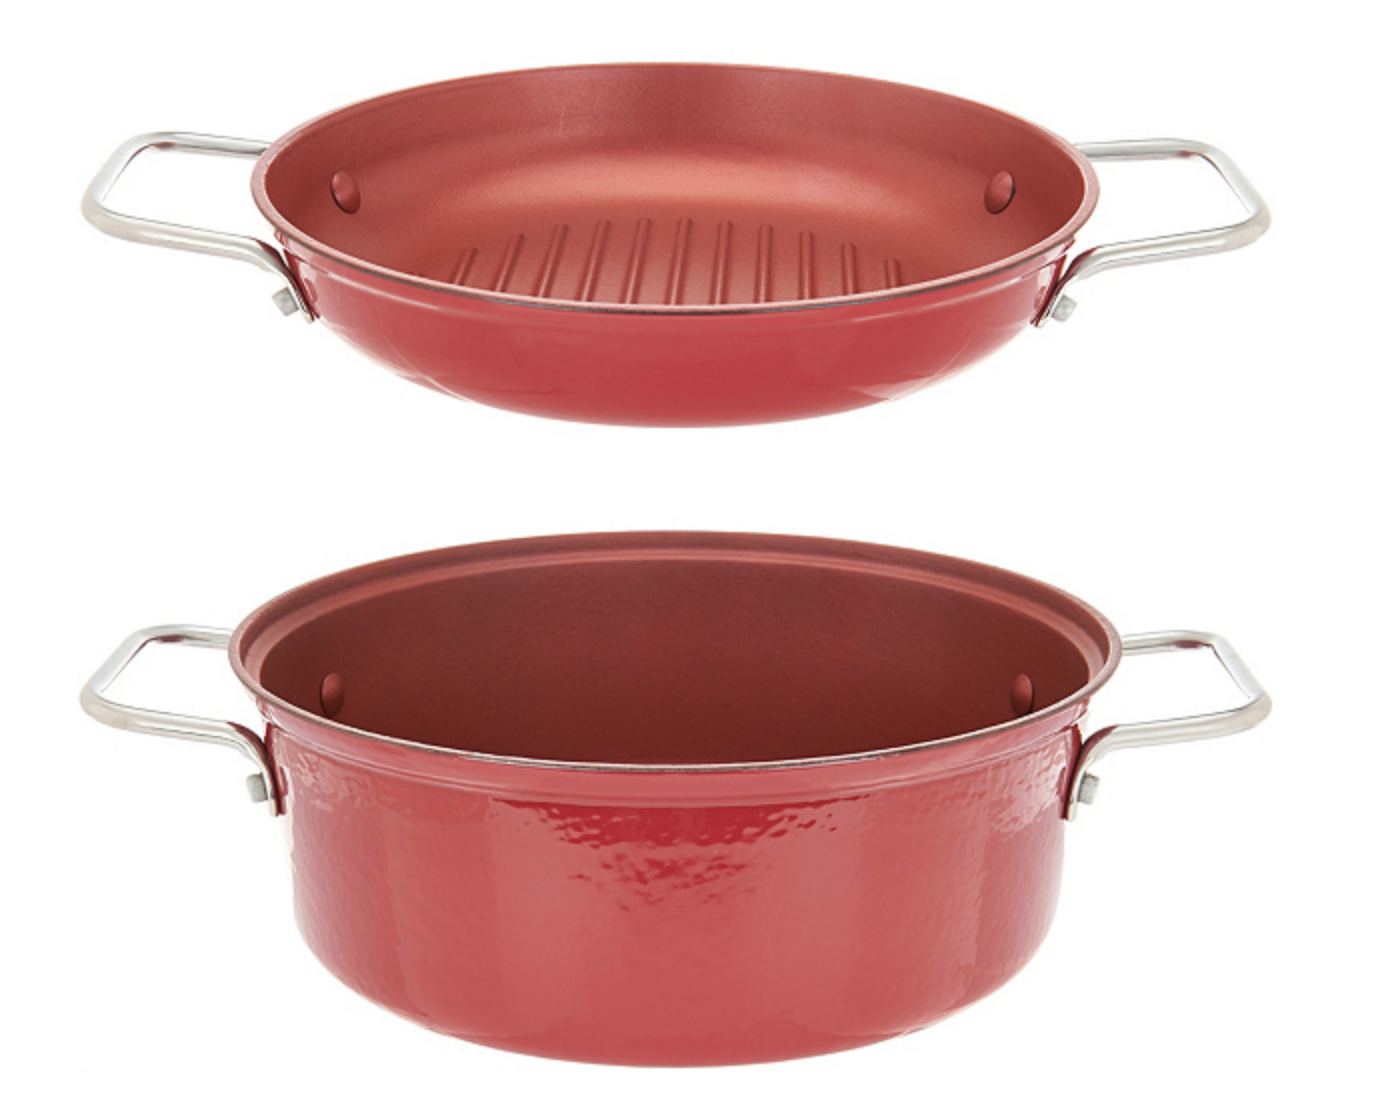 32 Kitchen Items That Prove Cast Iron Is Serious Business